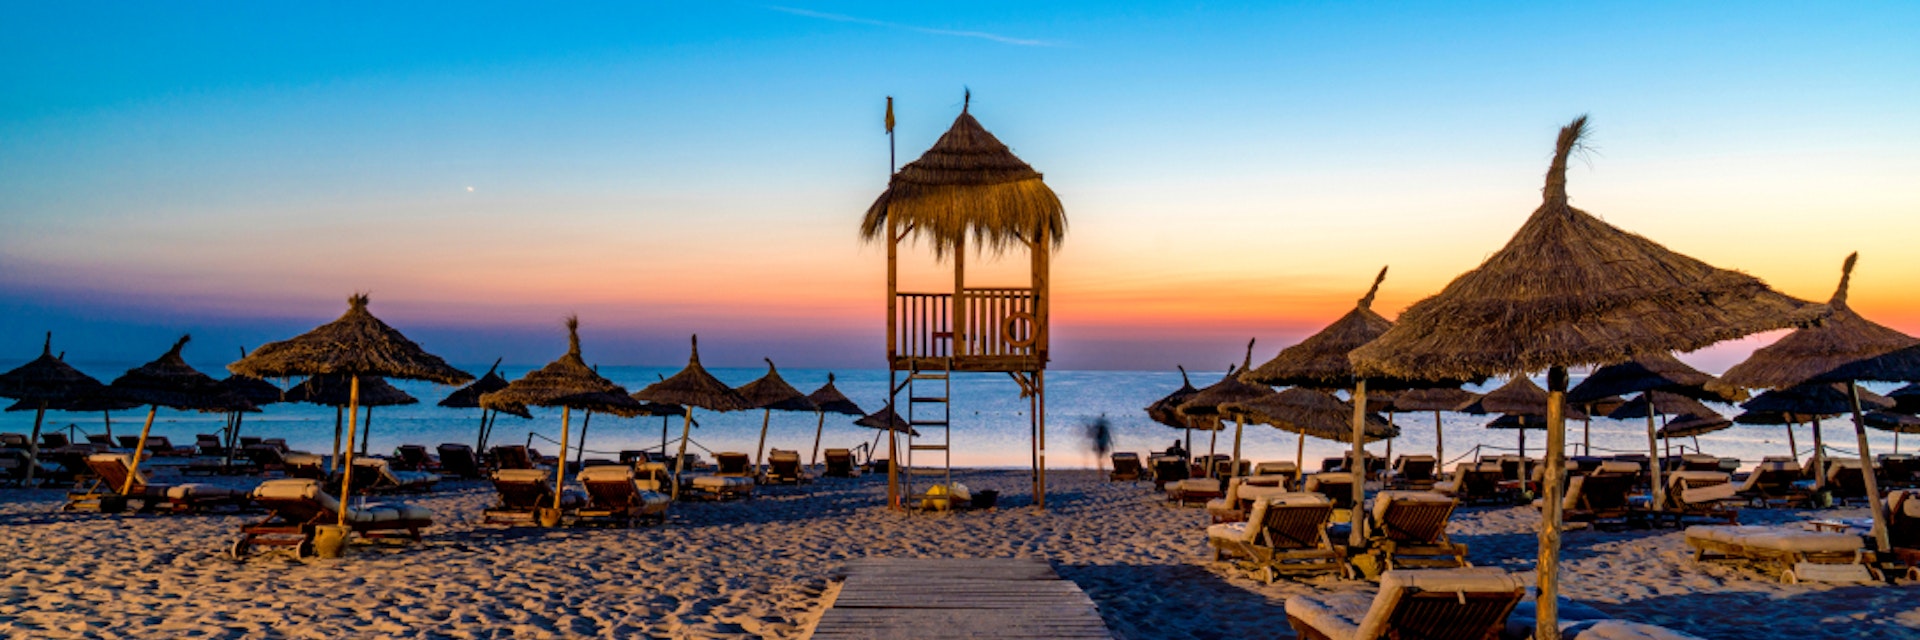 Tunisia Yasminea Hammamet Resort Beach Sunrise; Shutterstock ID 1014974068; Your name (First / Last): Lauren Keith; GL account no.: 65050; Netsuite department name: Online Editorial; Full Product or Project name including edition: Tunisia Destination Page image update